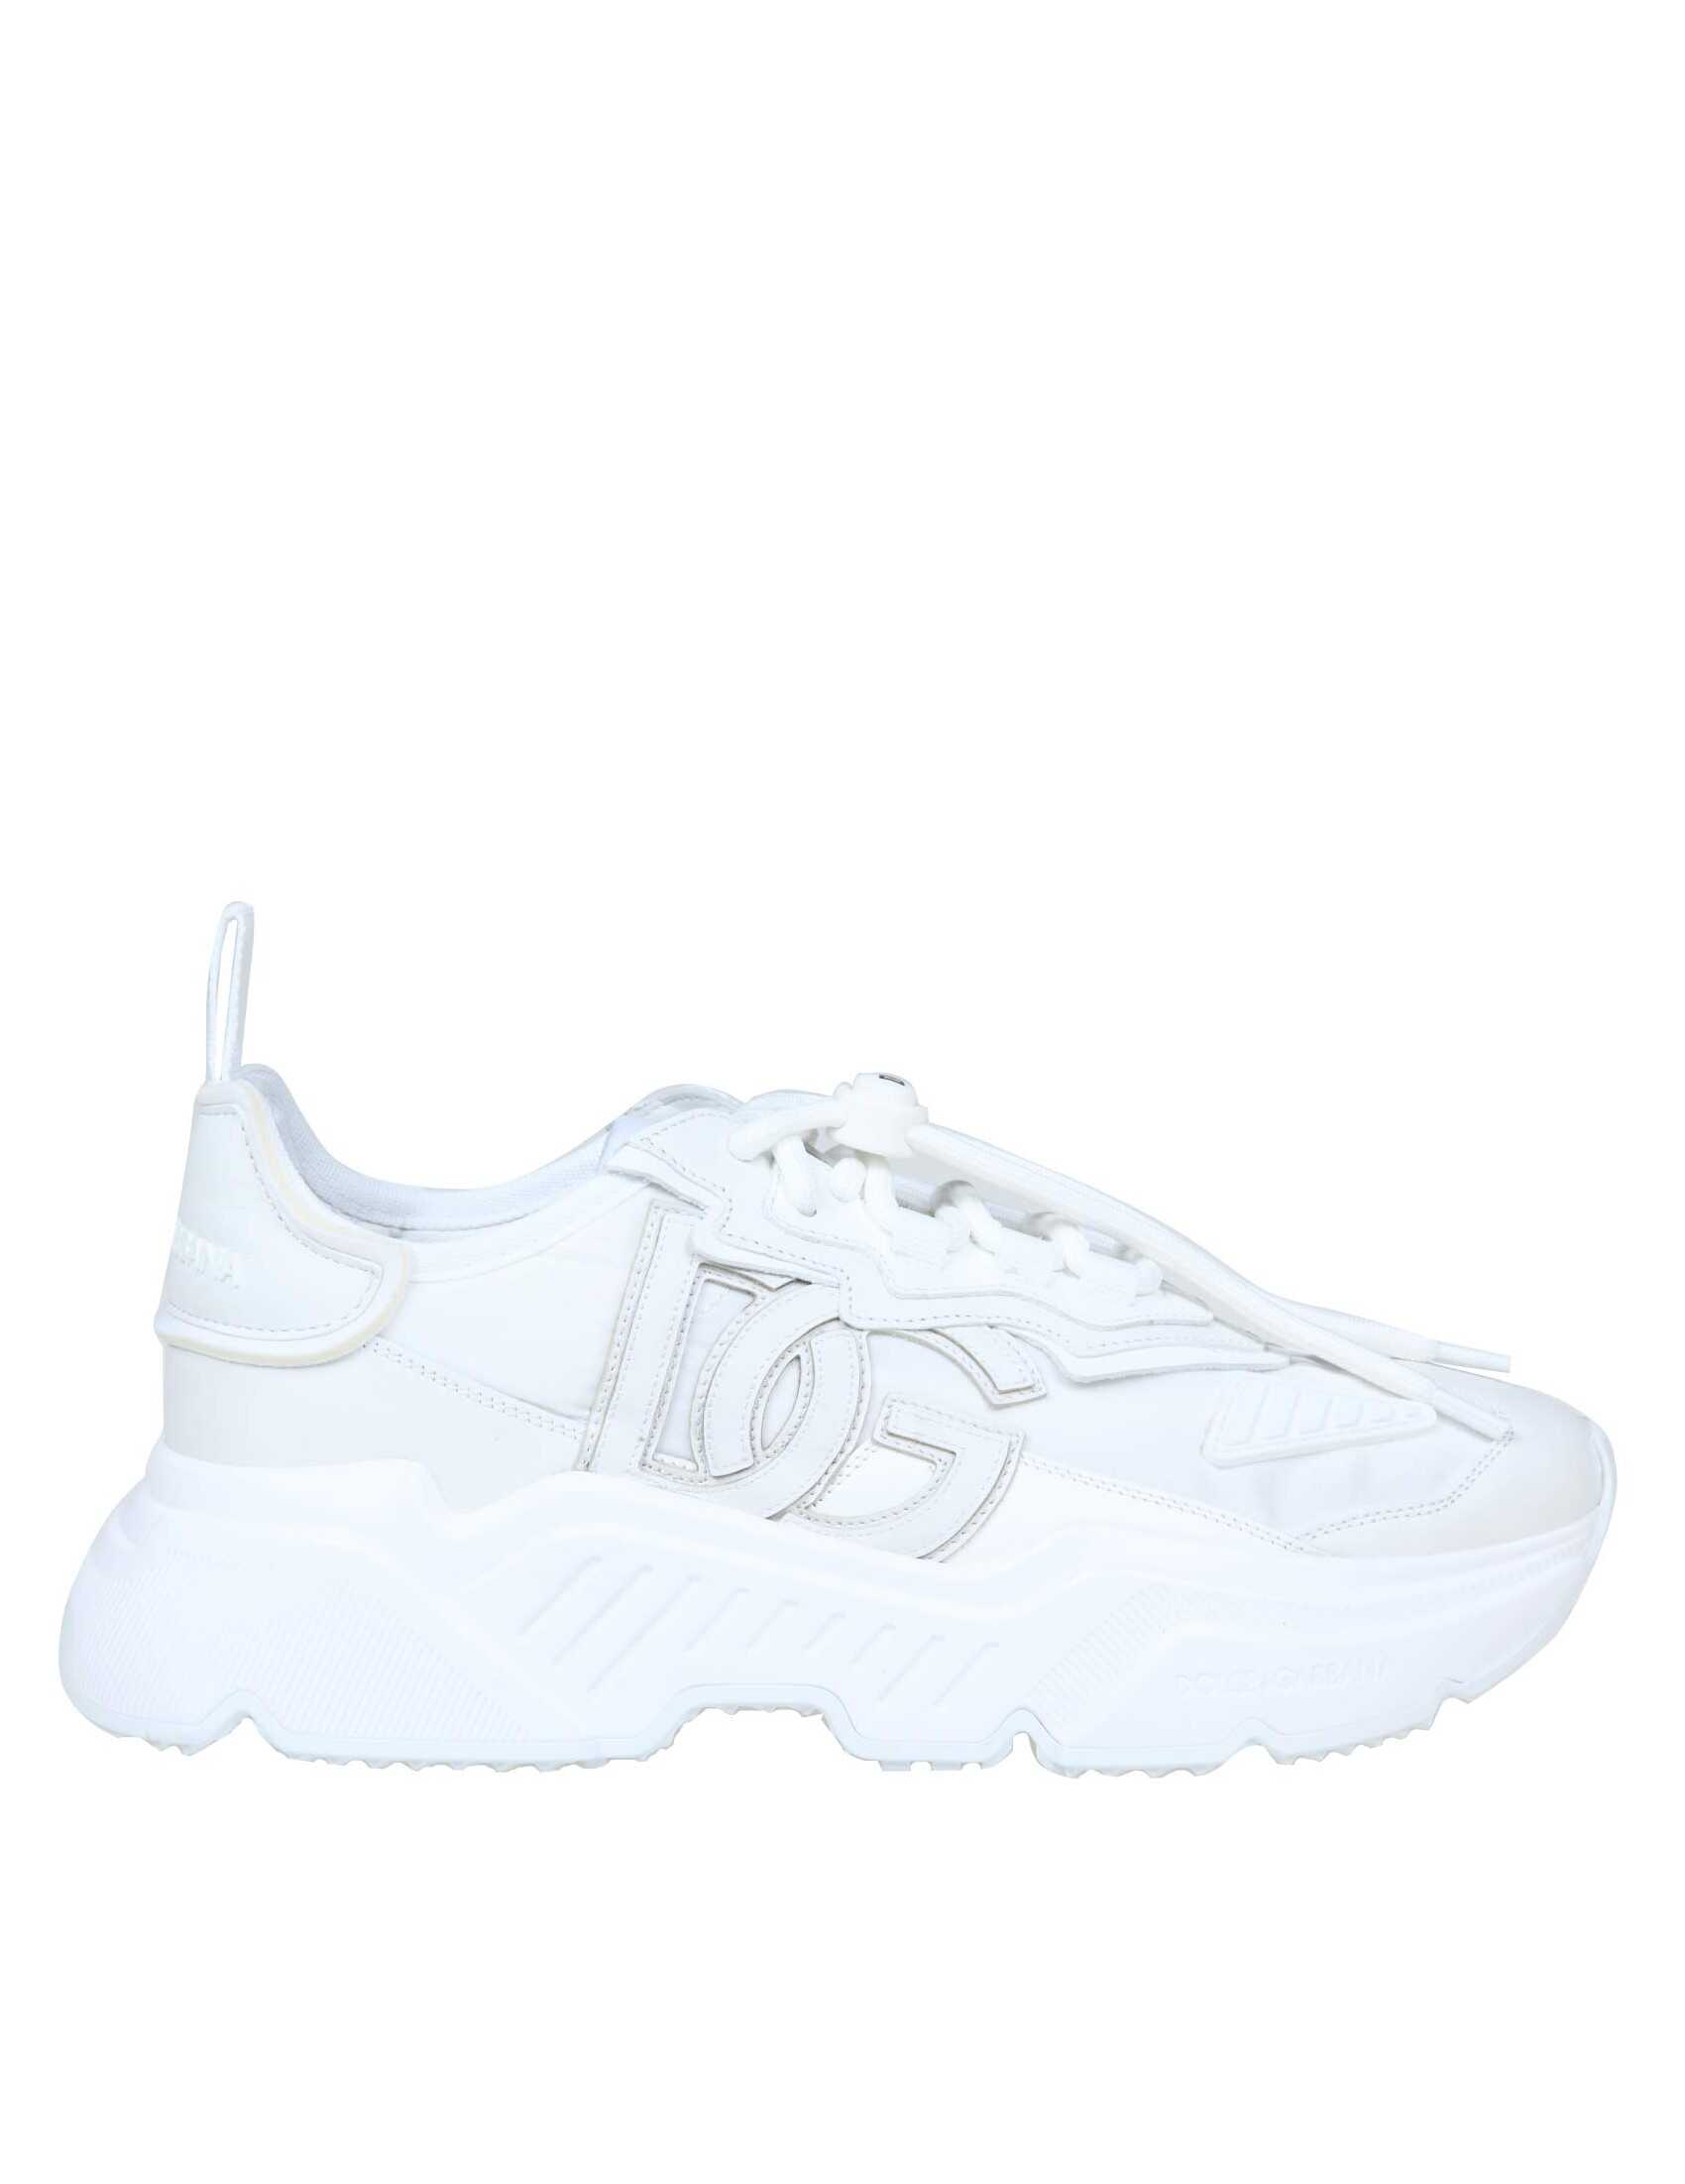 Dolce & Gabbana daymaster sneakers in nylon and leather White